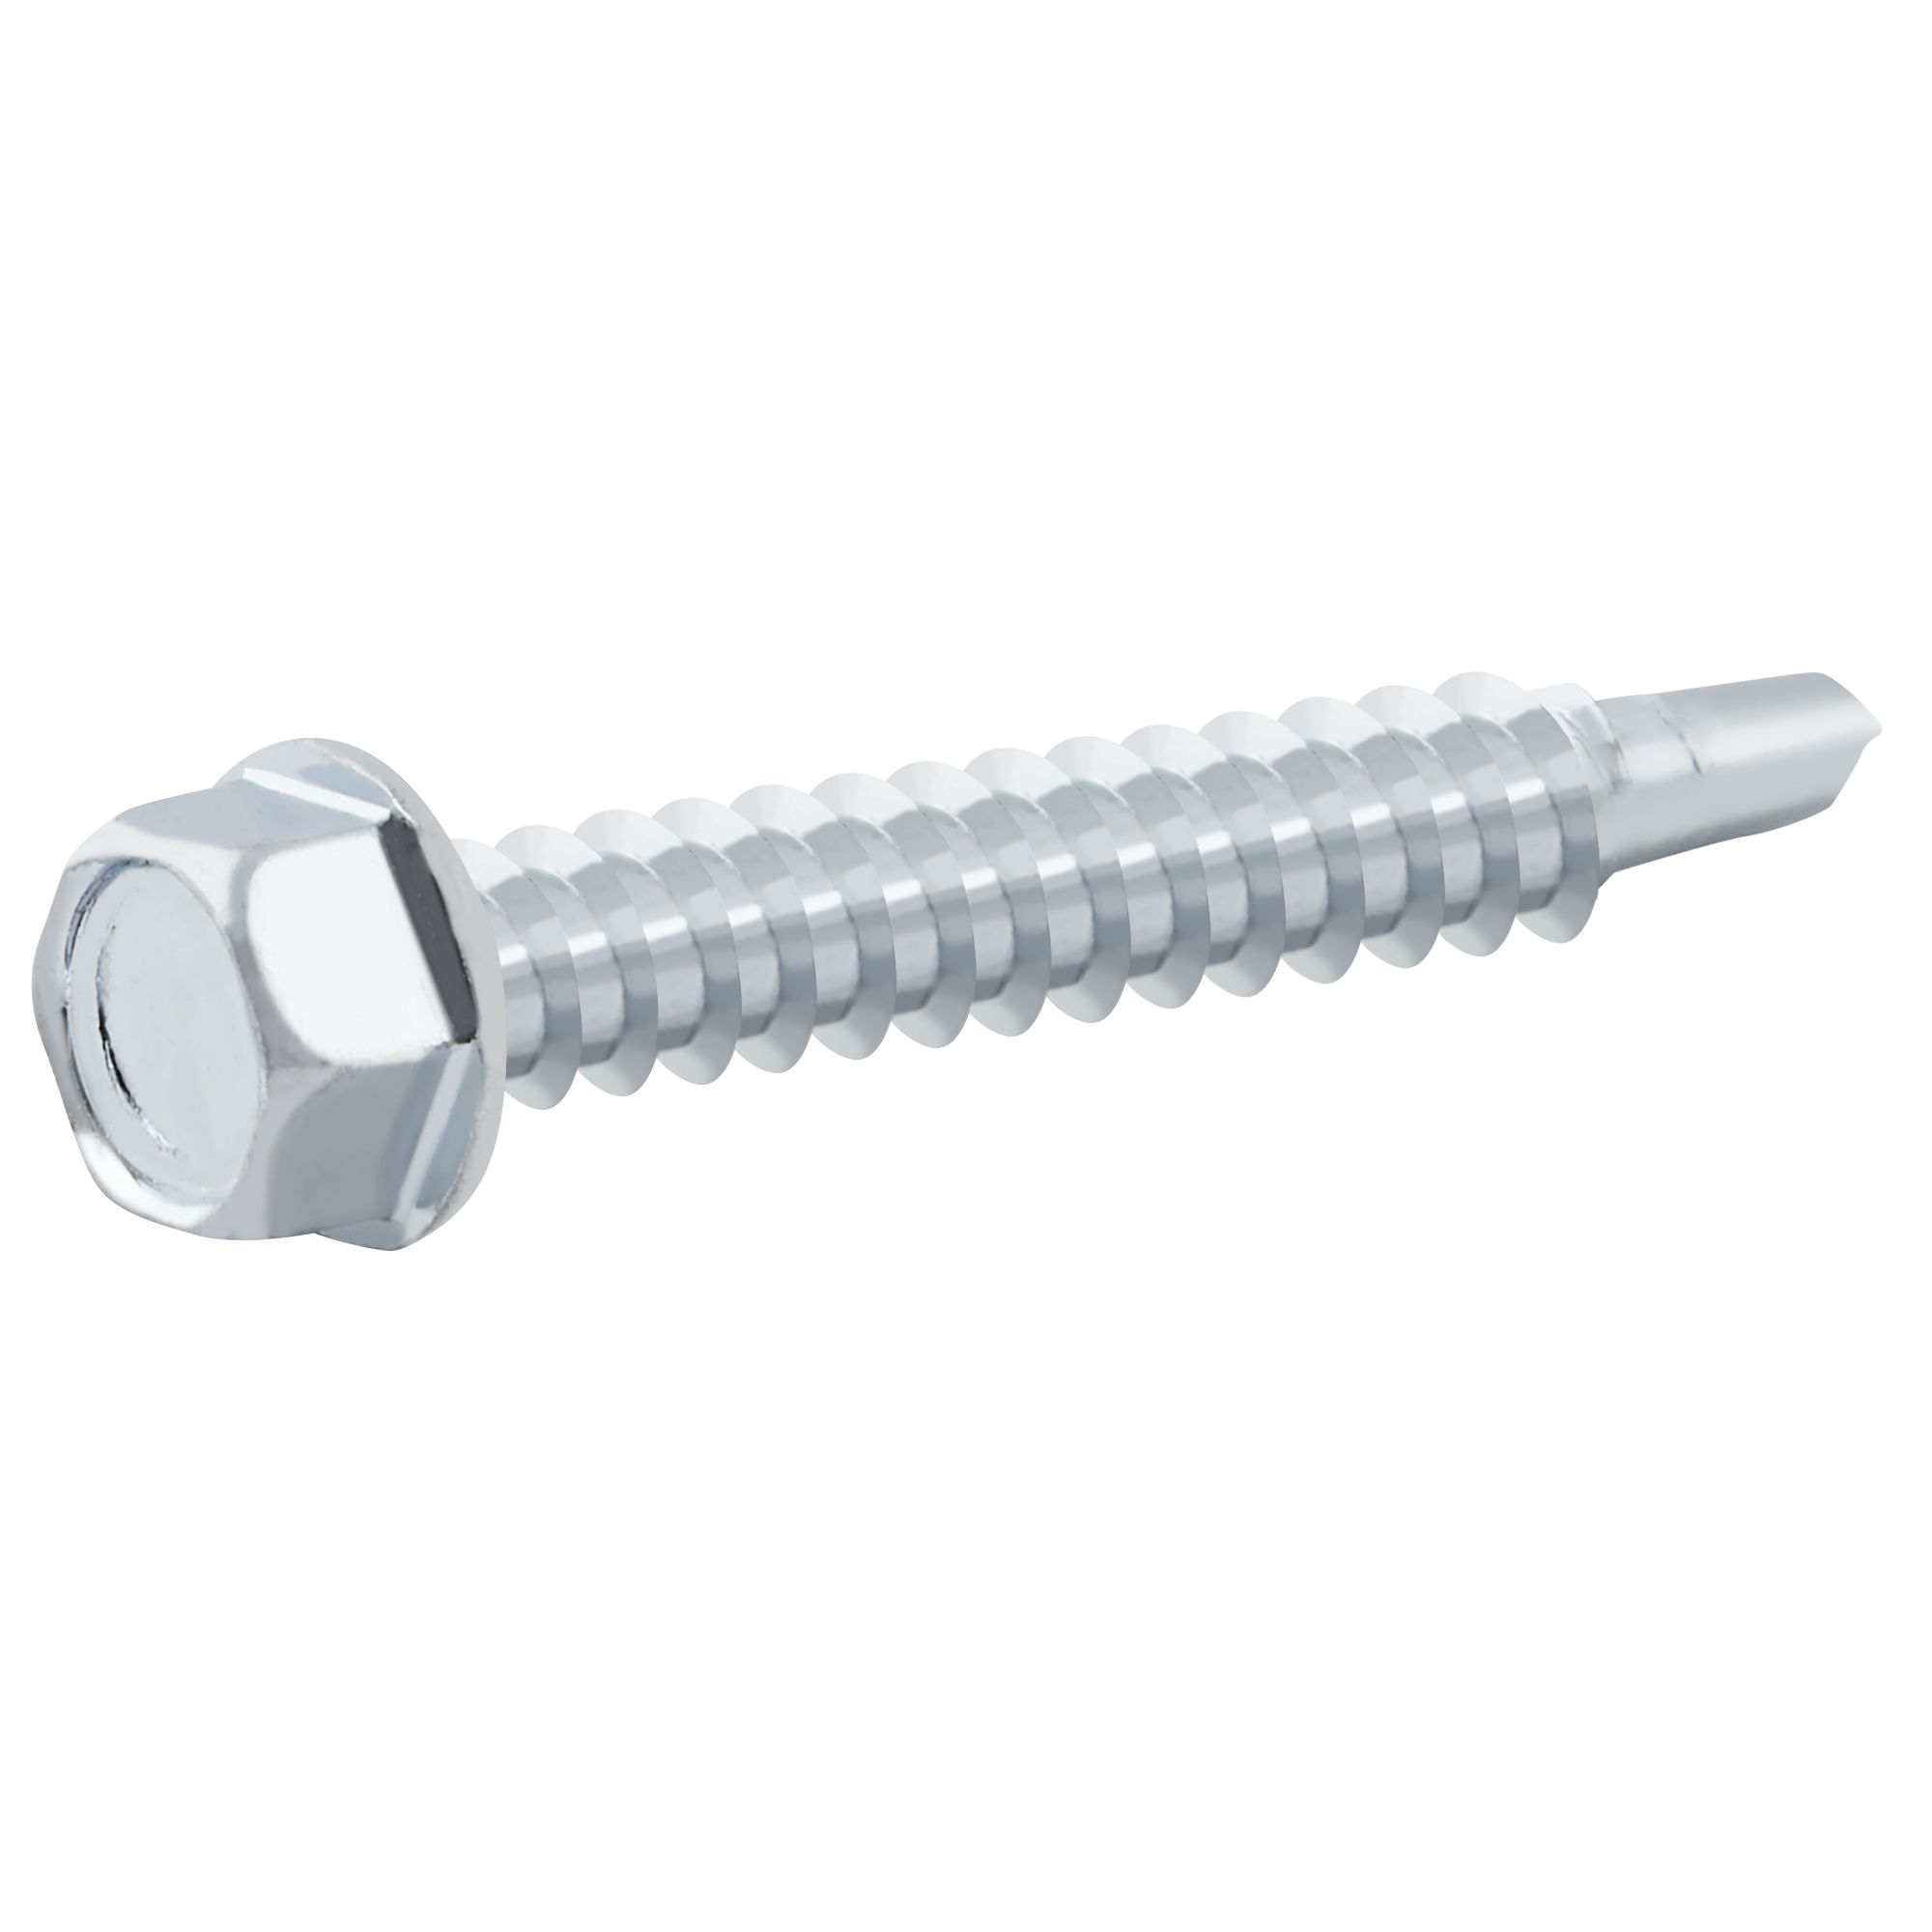 Diall Hex Zinc-plated Carbon steel Screw (Dia)5.5mm (L)38mm, Pack of 100